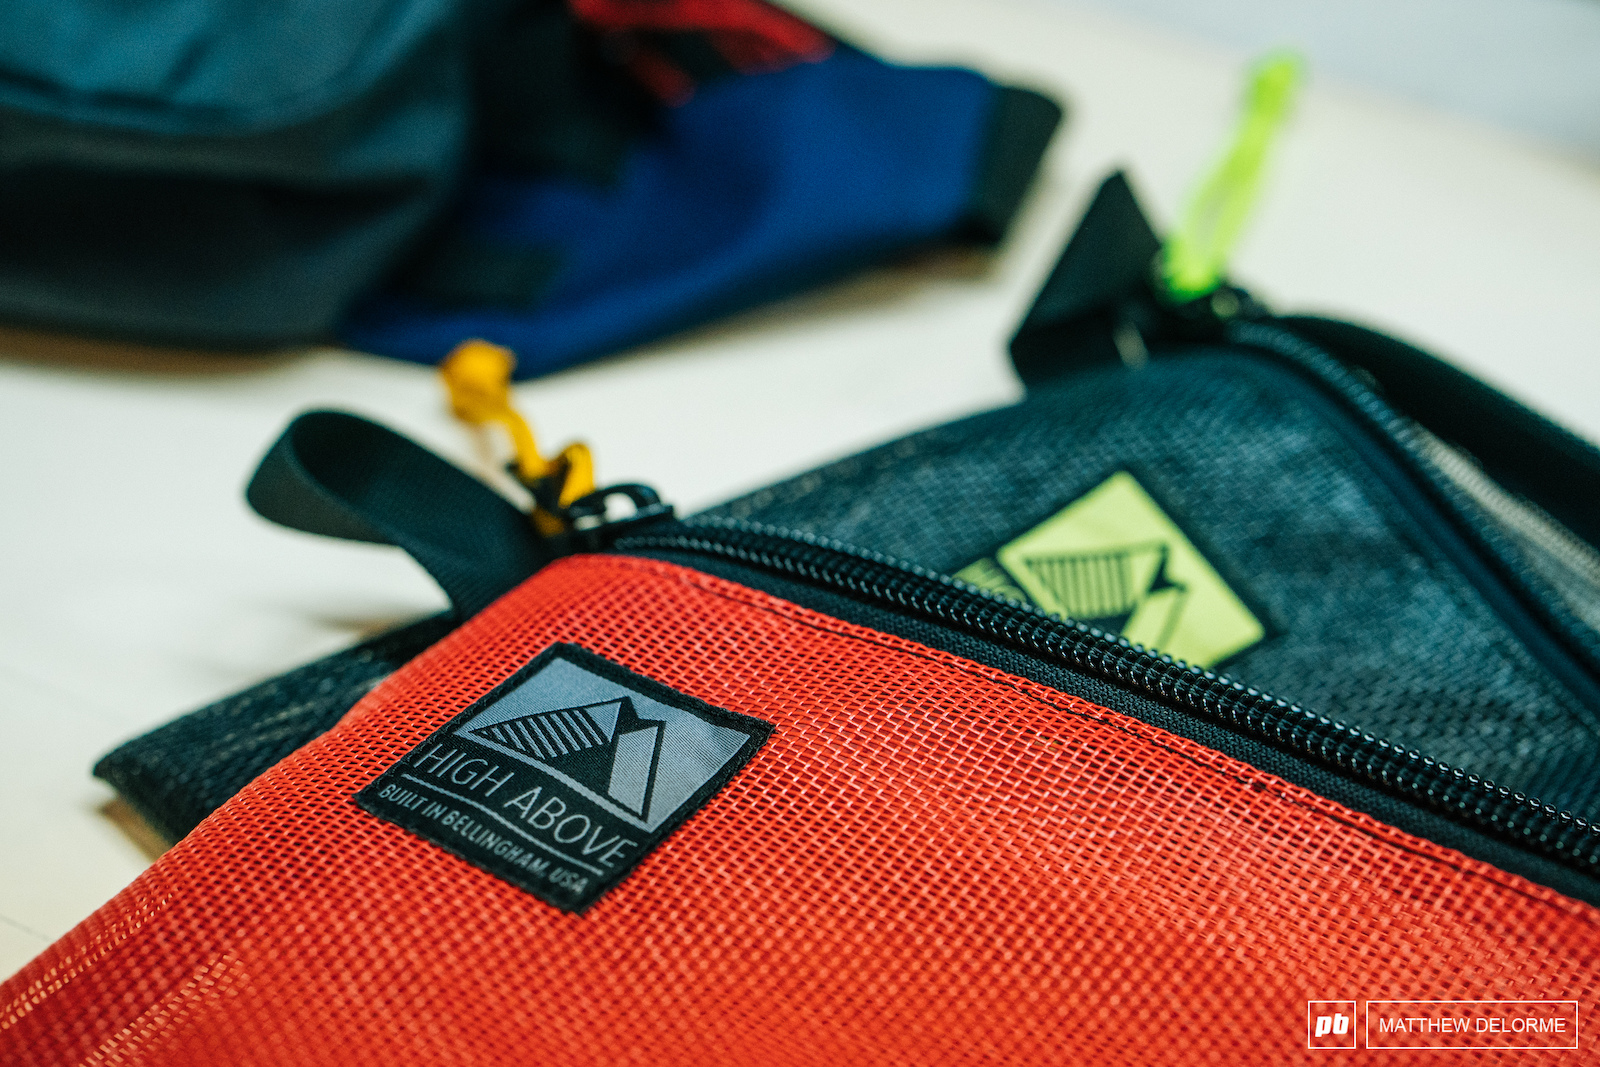 Mesh gear pouches are another offering from High Above.